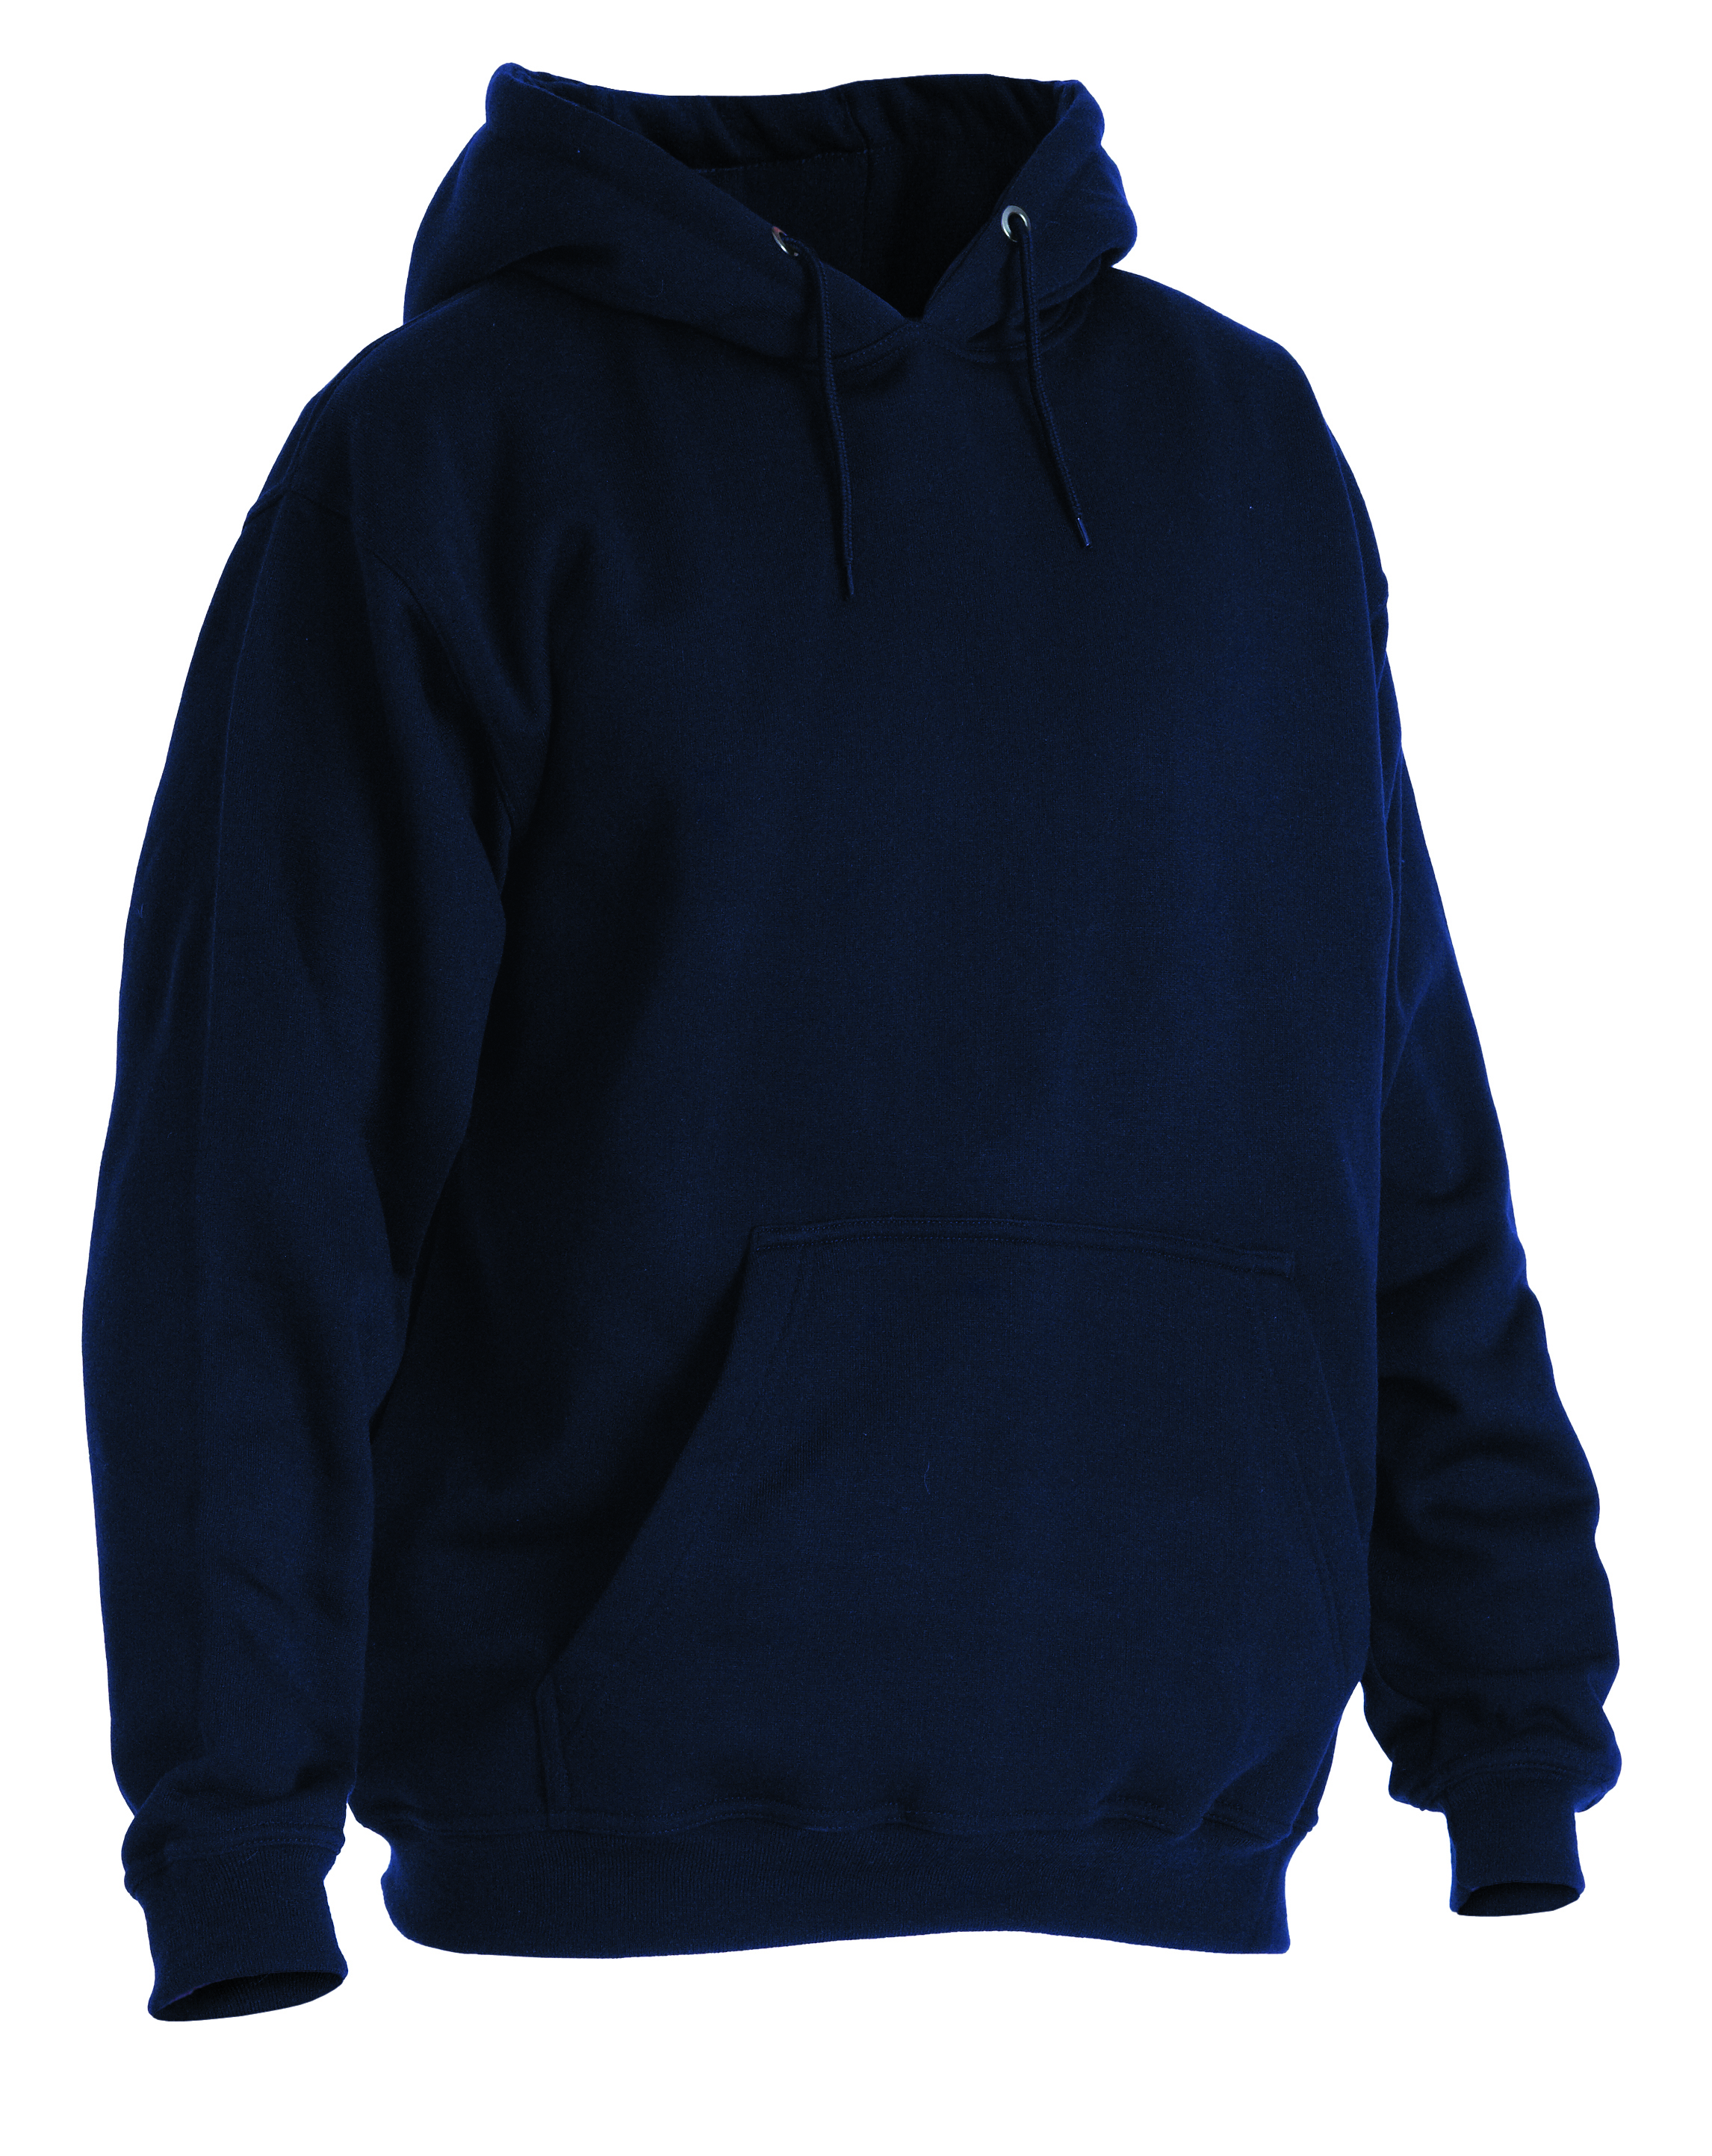 Falcon Panelled Hooded Top